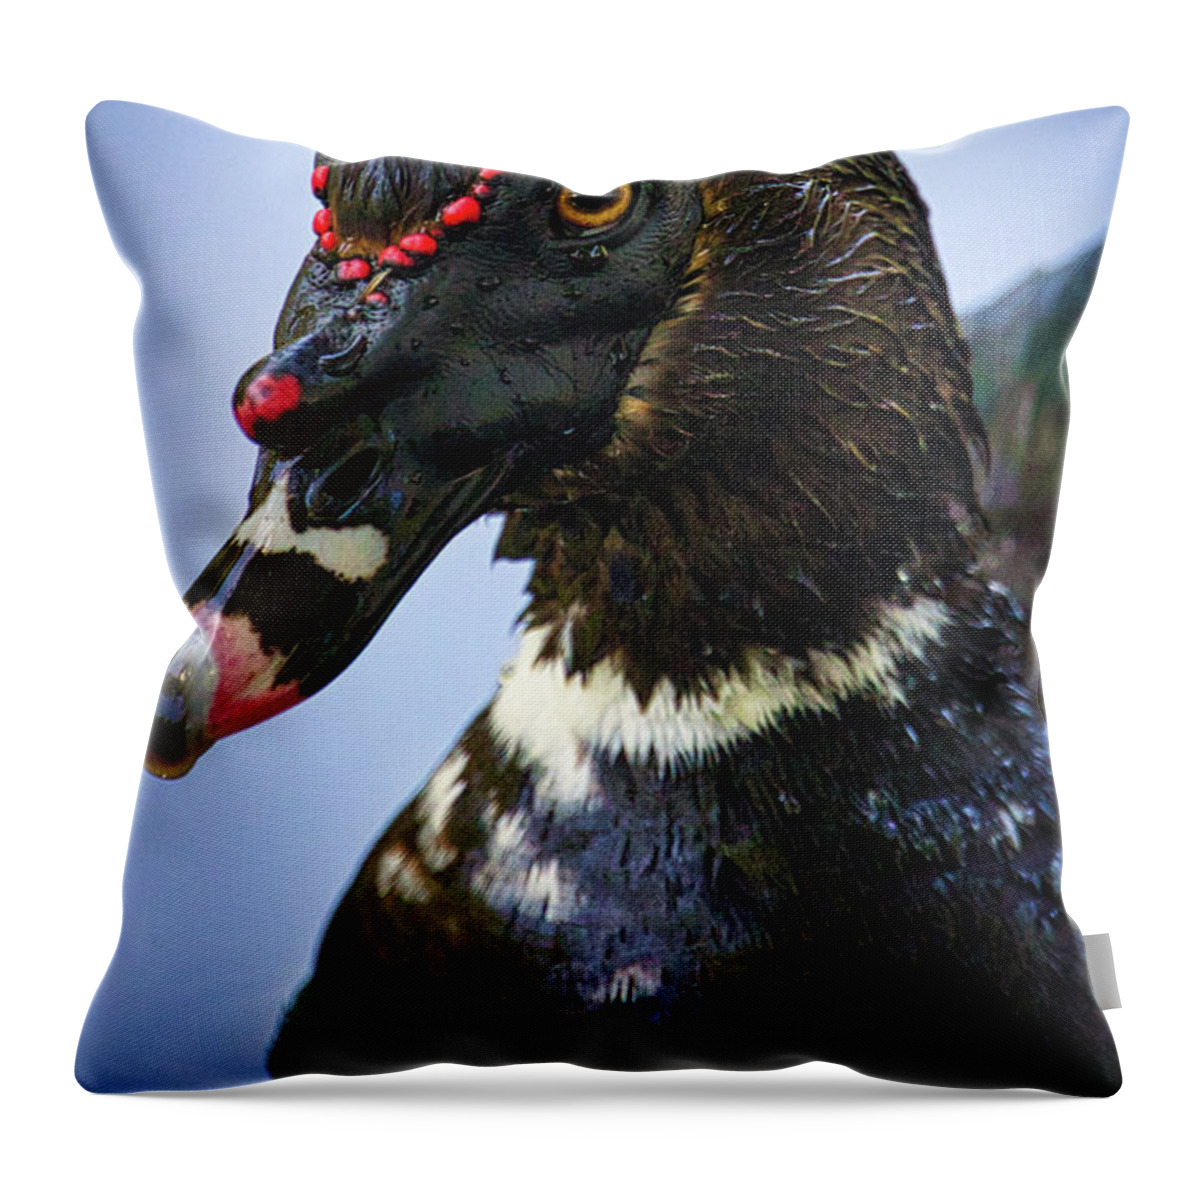 Duck Throw Pillow featuring the photograph Muscovy Duck by Rene Vasquez